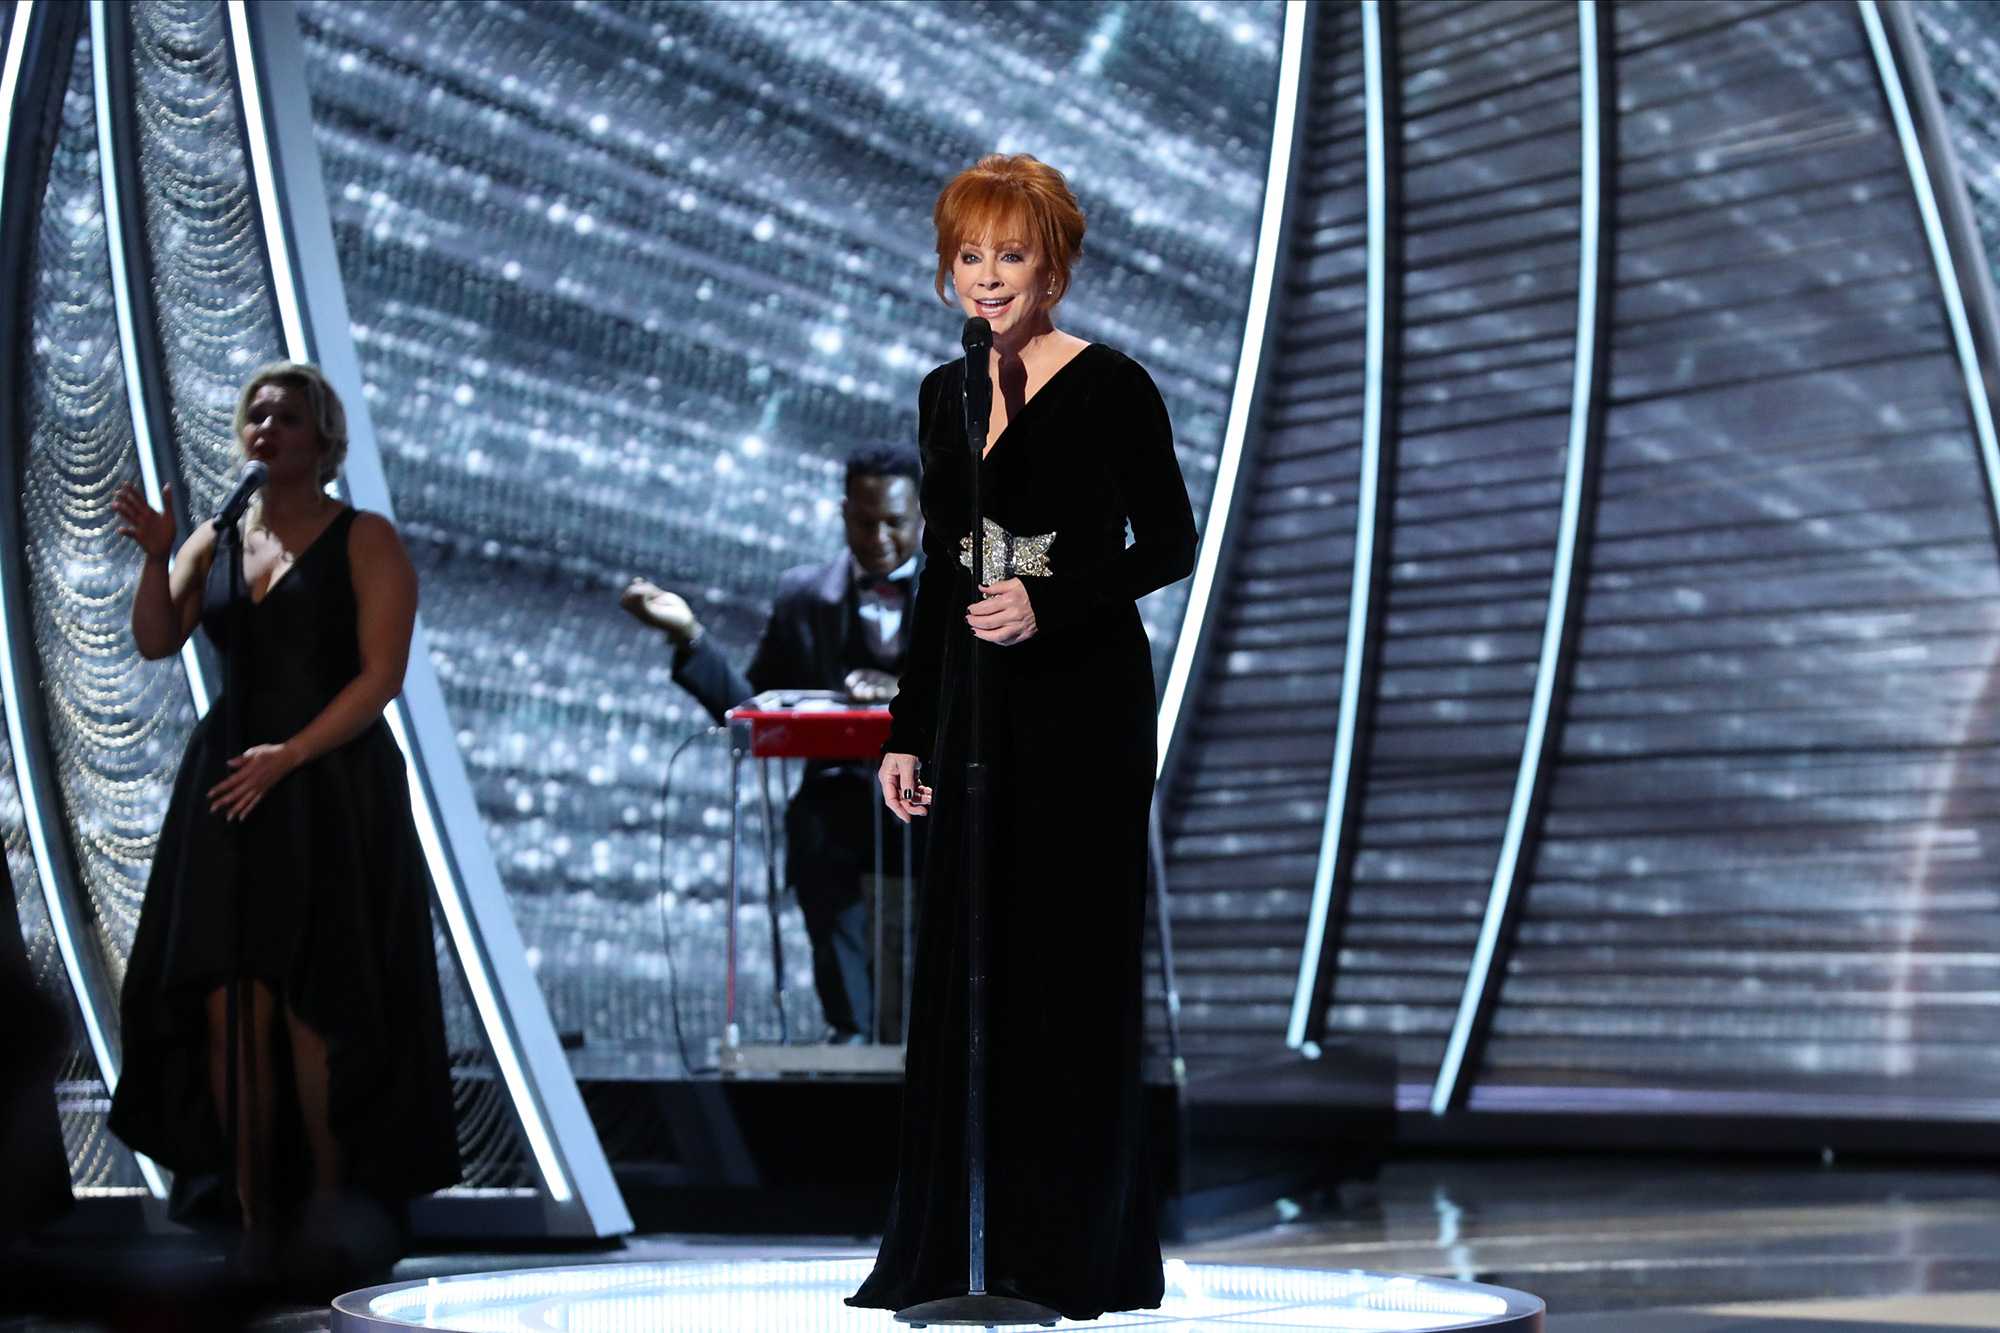 Reba McEntire performs onstage during the 94th Annual Academy Awards.